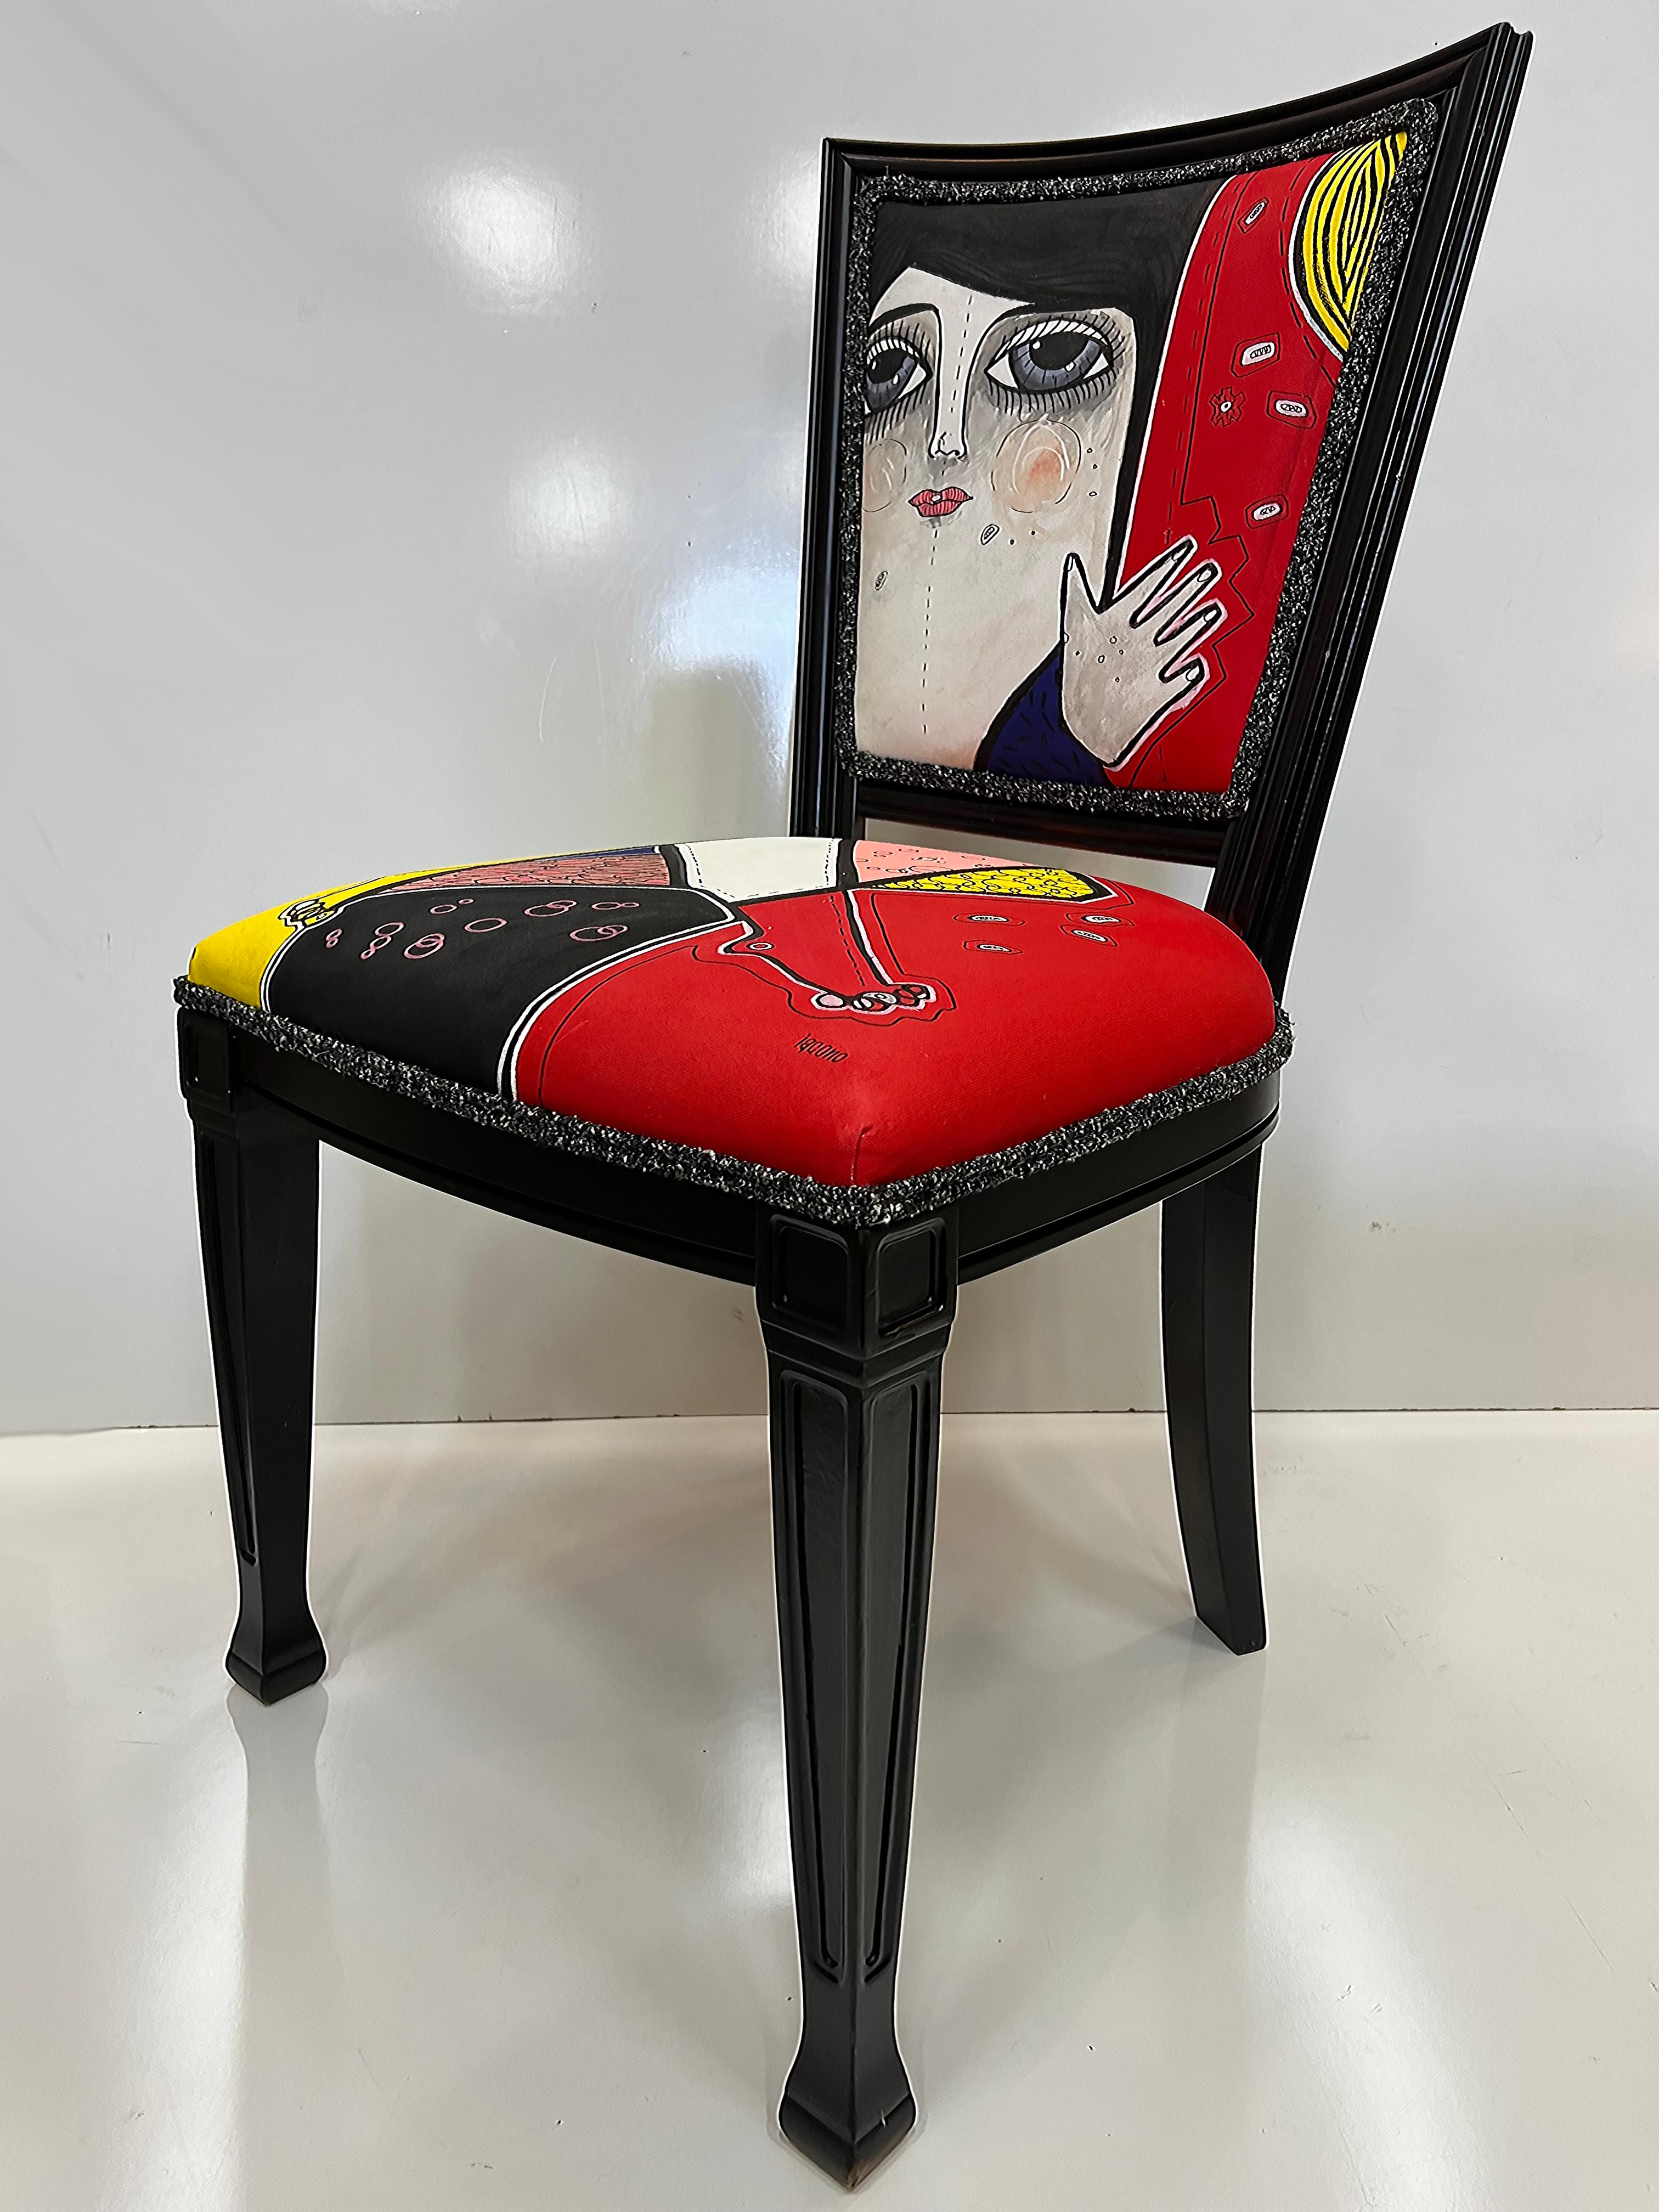 

Vanessa Iacono Abstract Functional Art Painted Accent Chair 

Offered for sale is a one-of-a-kind original hand-painted original functional art abstract chair.  Iacono is an Italo-Venezuelan New York-based contemporary artist and psychologist. She